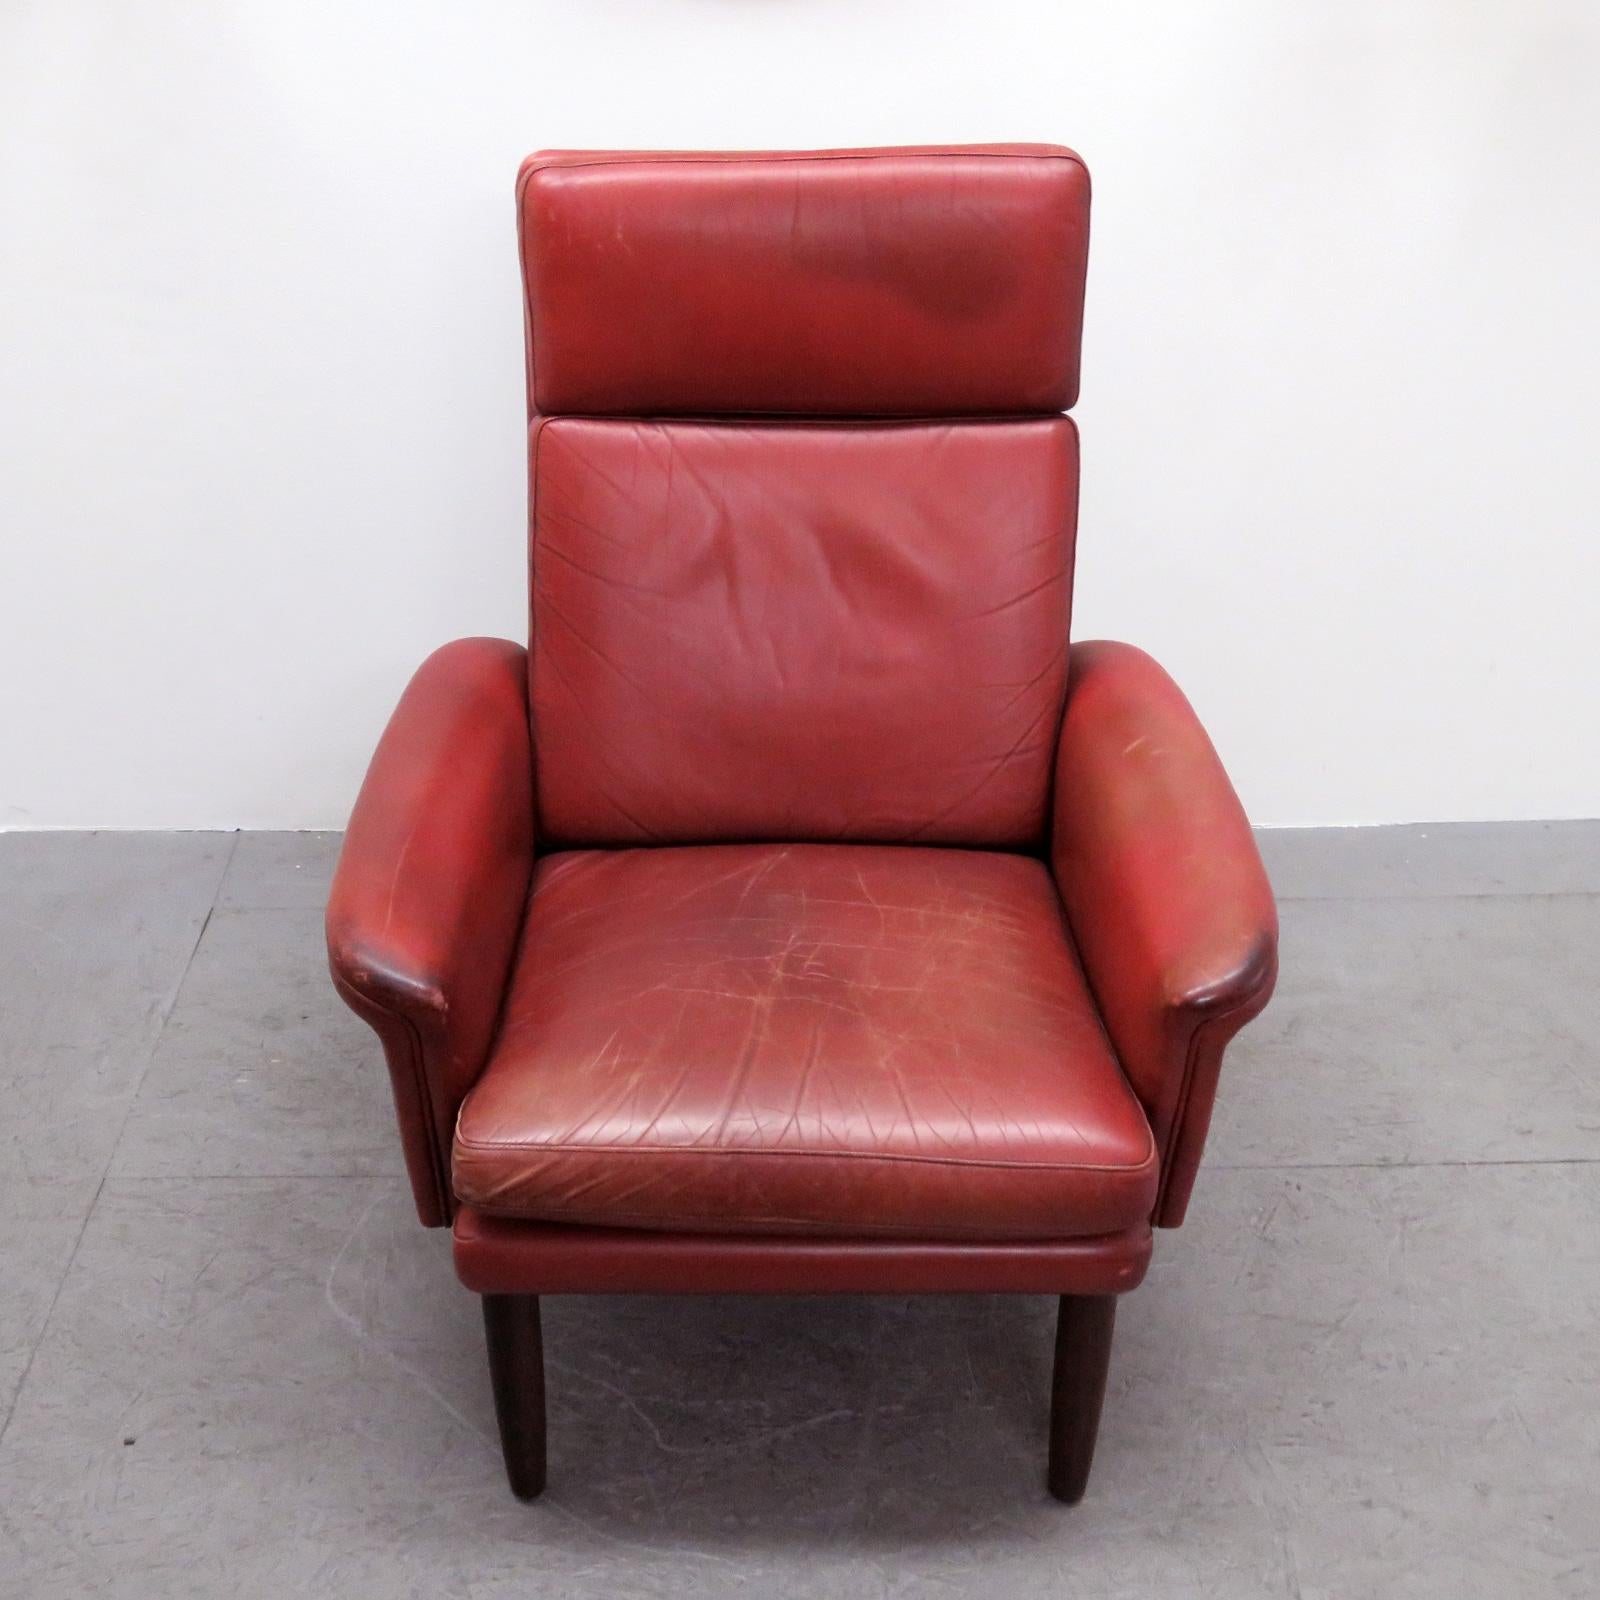 Danish High Back Leather Lounge Chair, 1960 For Sale 1